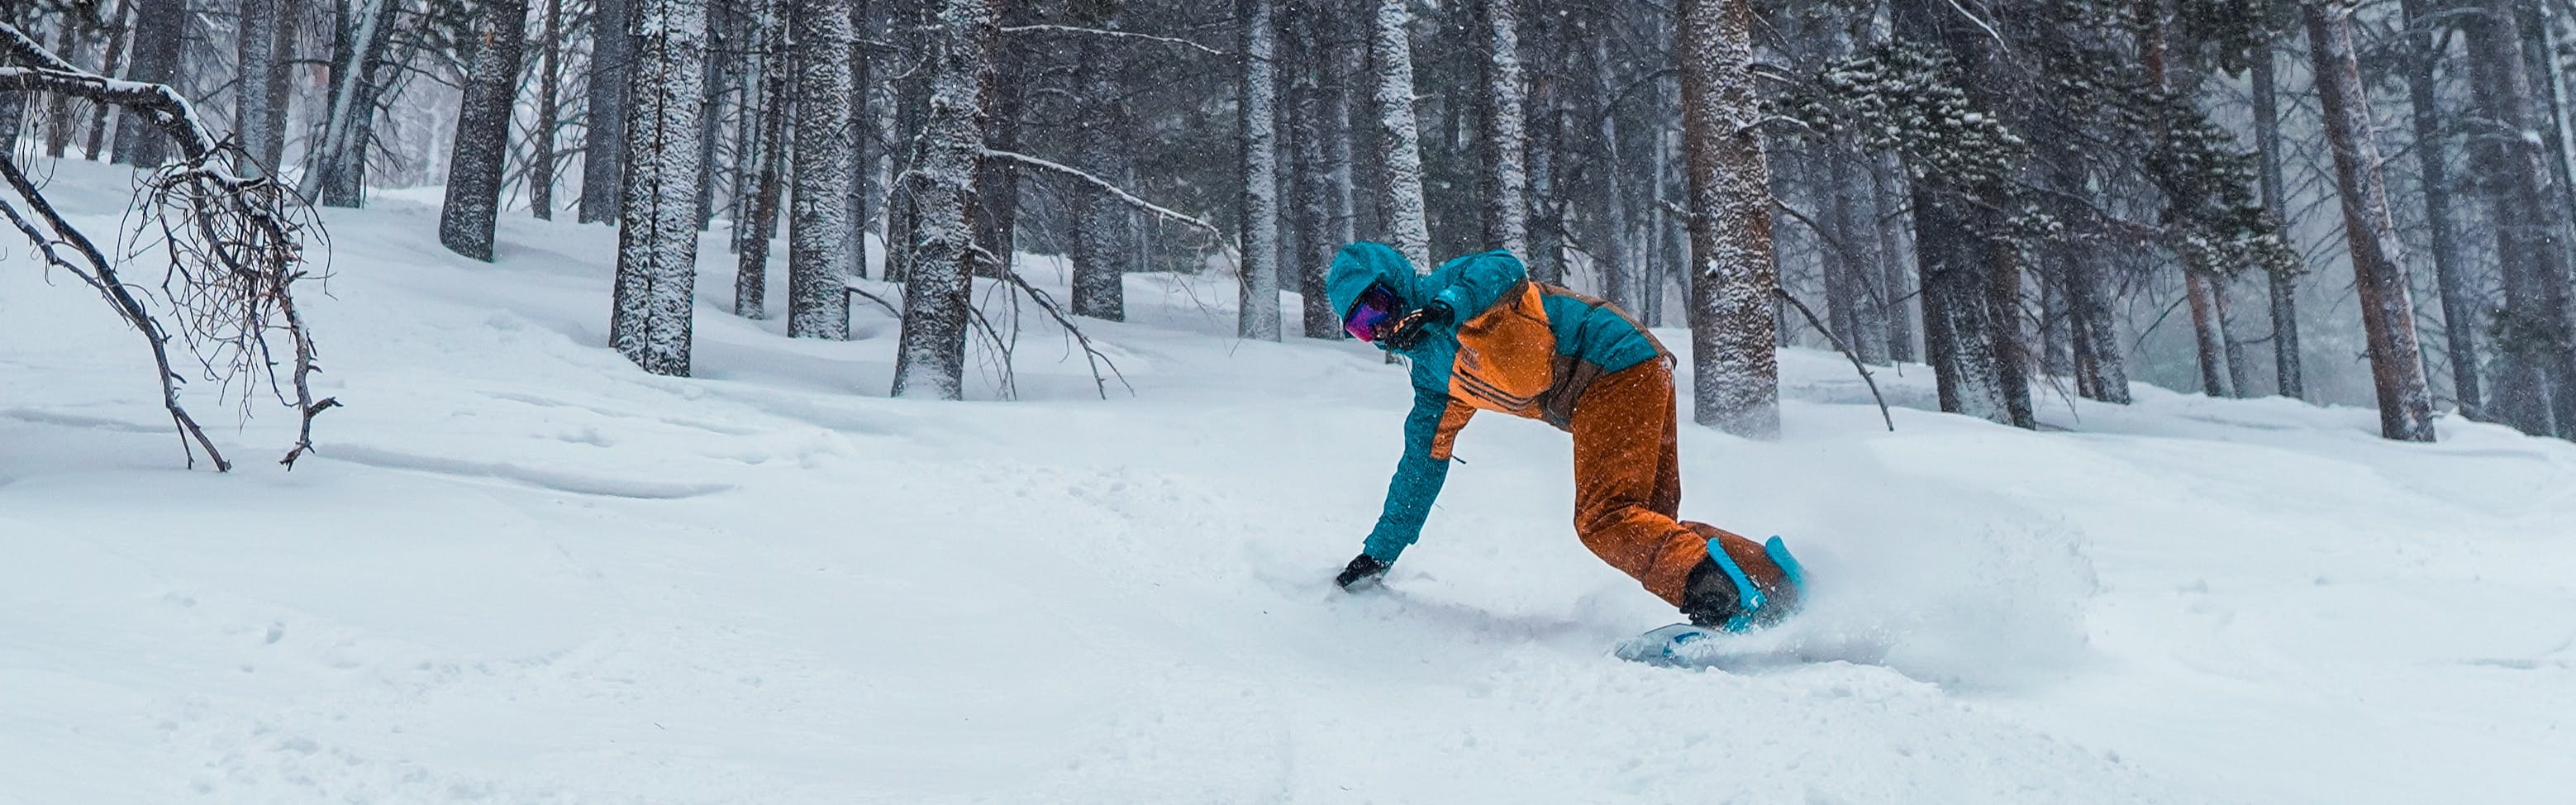 The Difference Between Ski and Snowboard Clothing